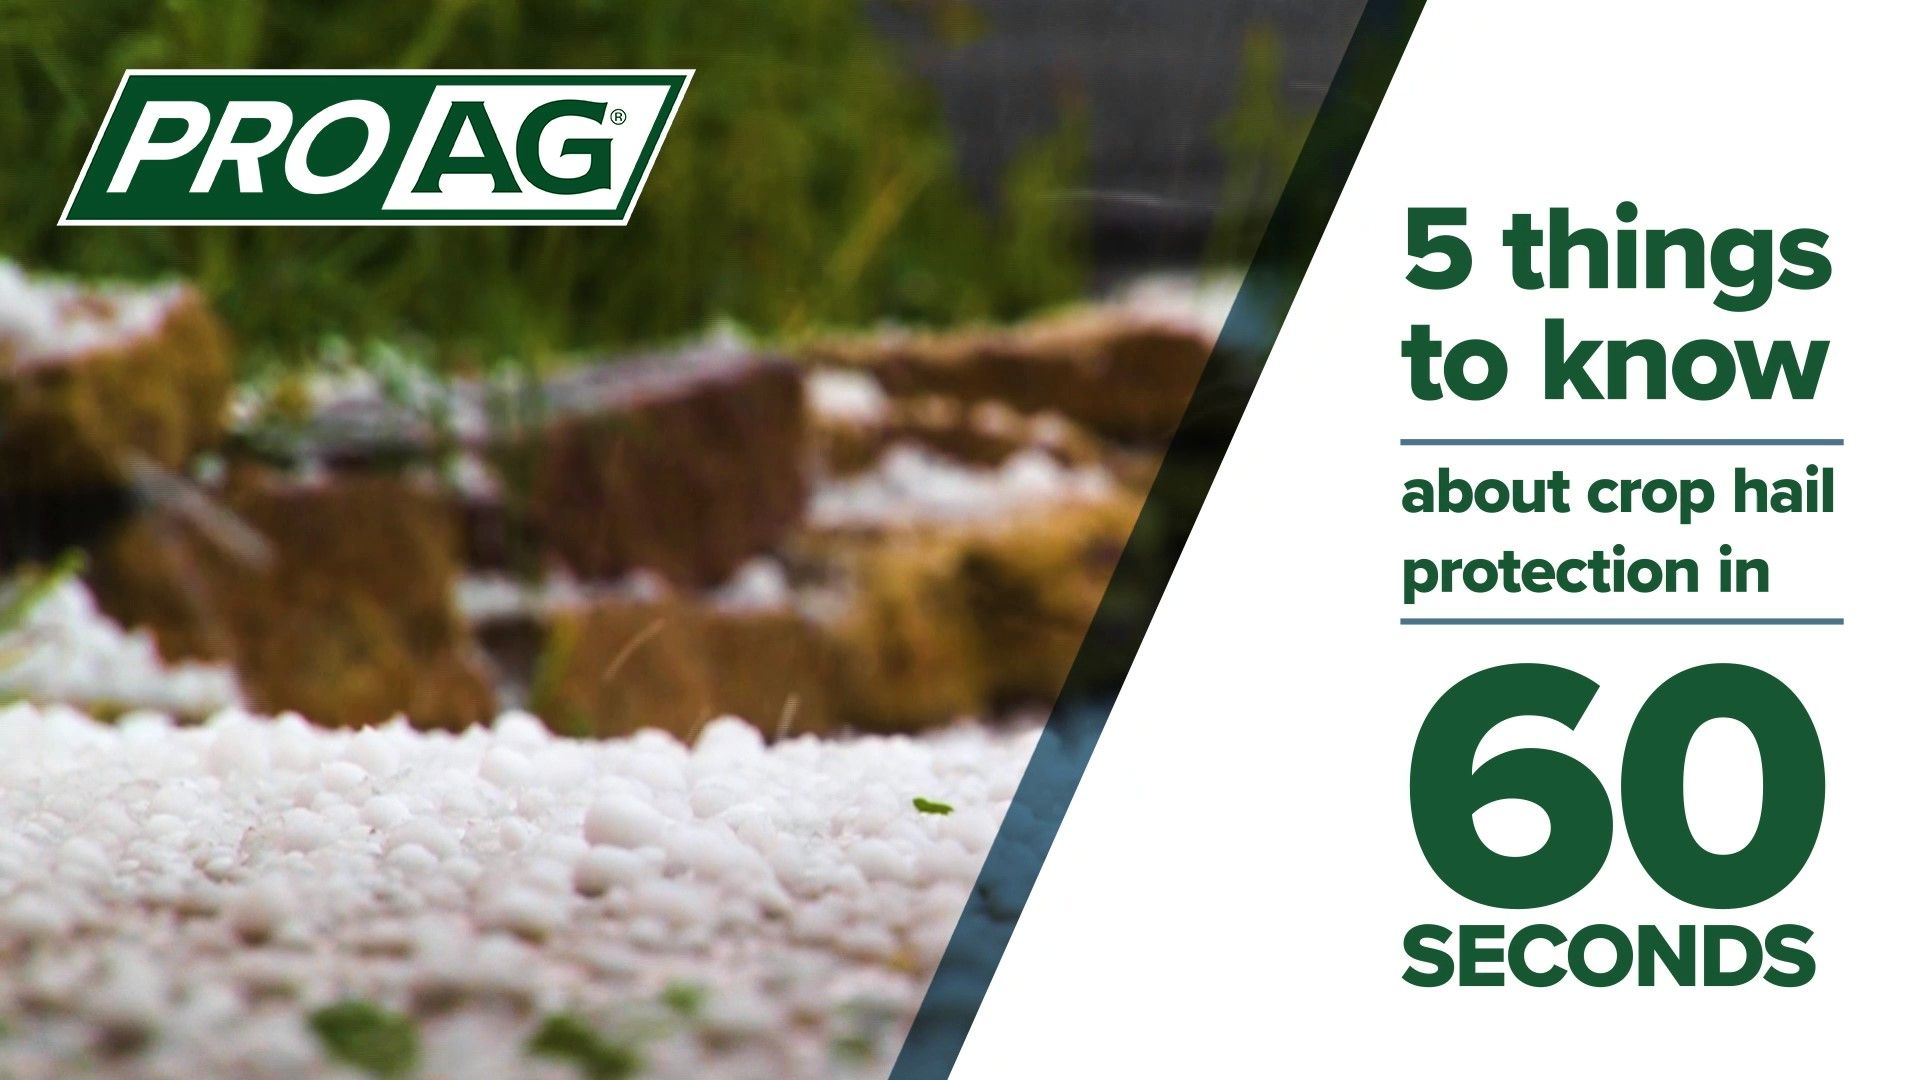 5 Things to Know About Crop Hail Insurance Protection in 60 Seconds